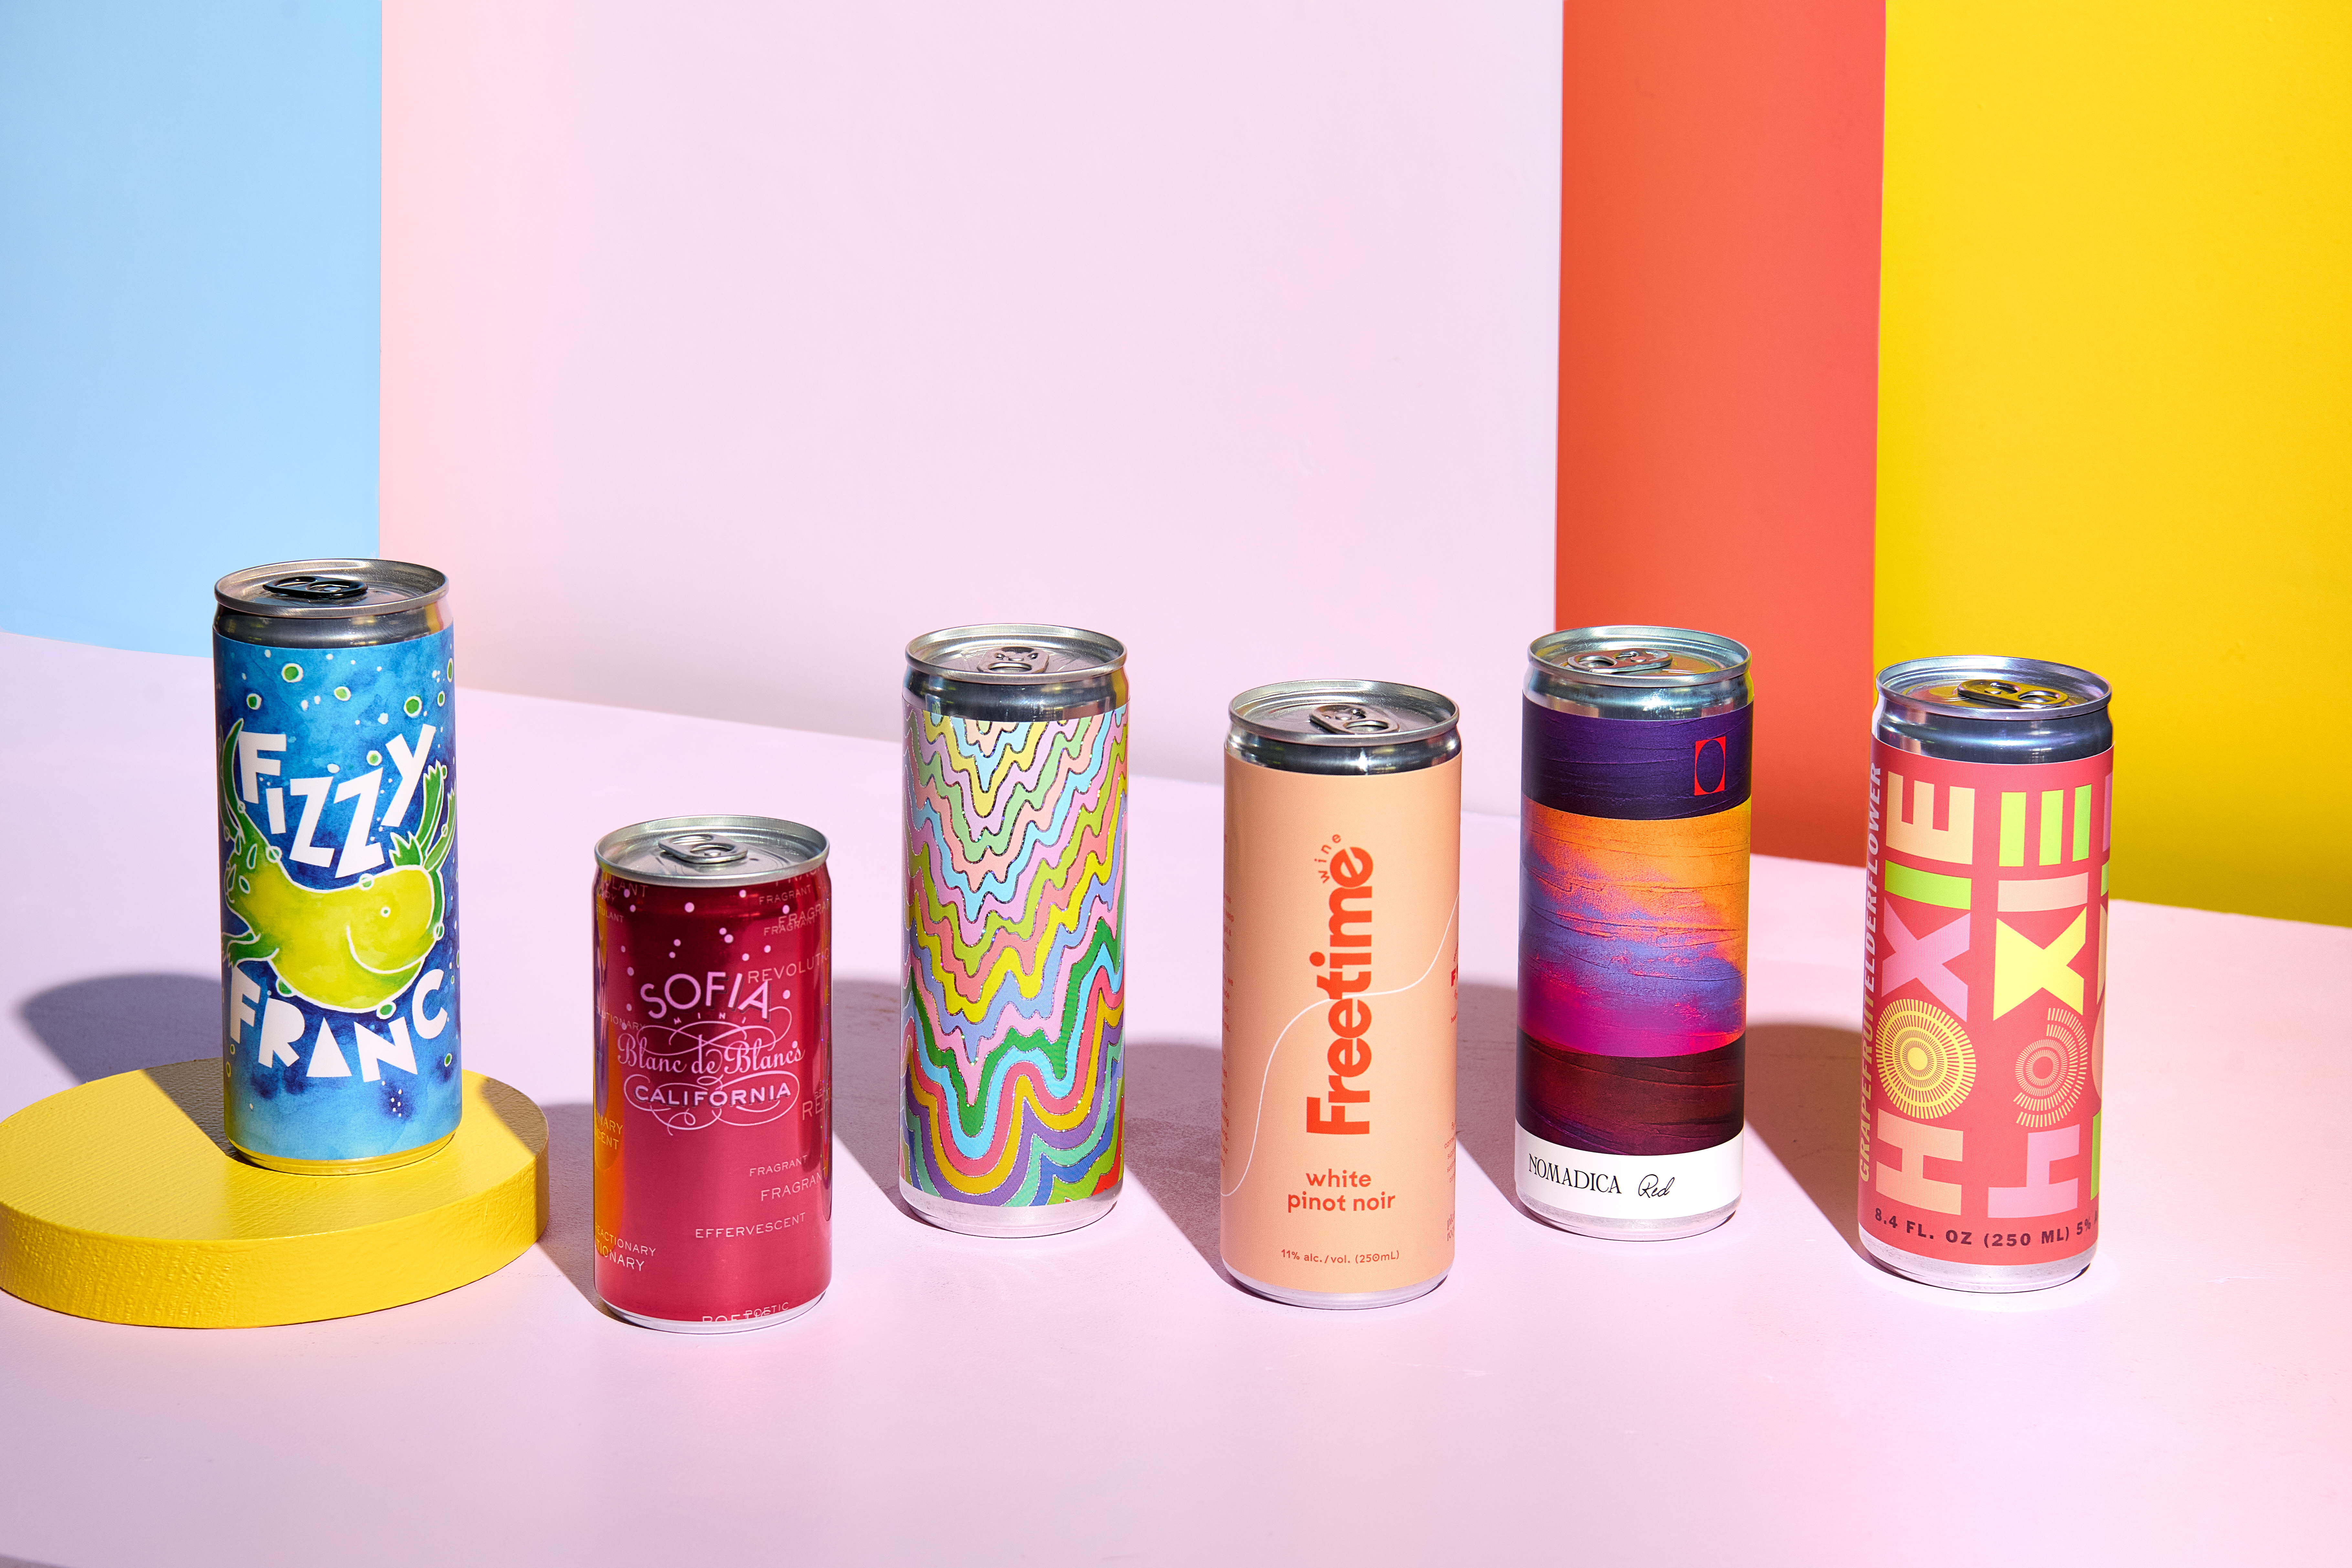 Six colorful wine cans sit on a pink table.